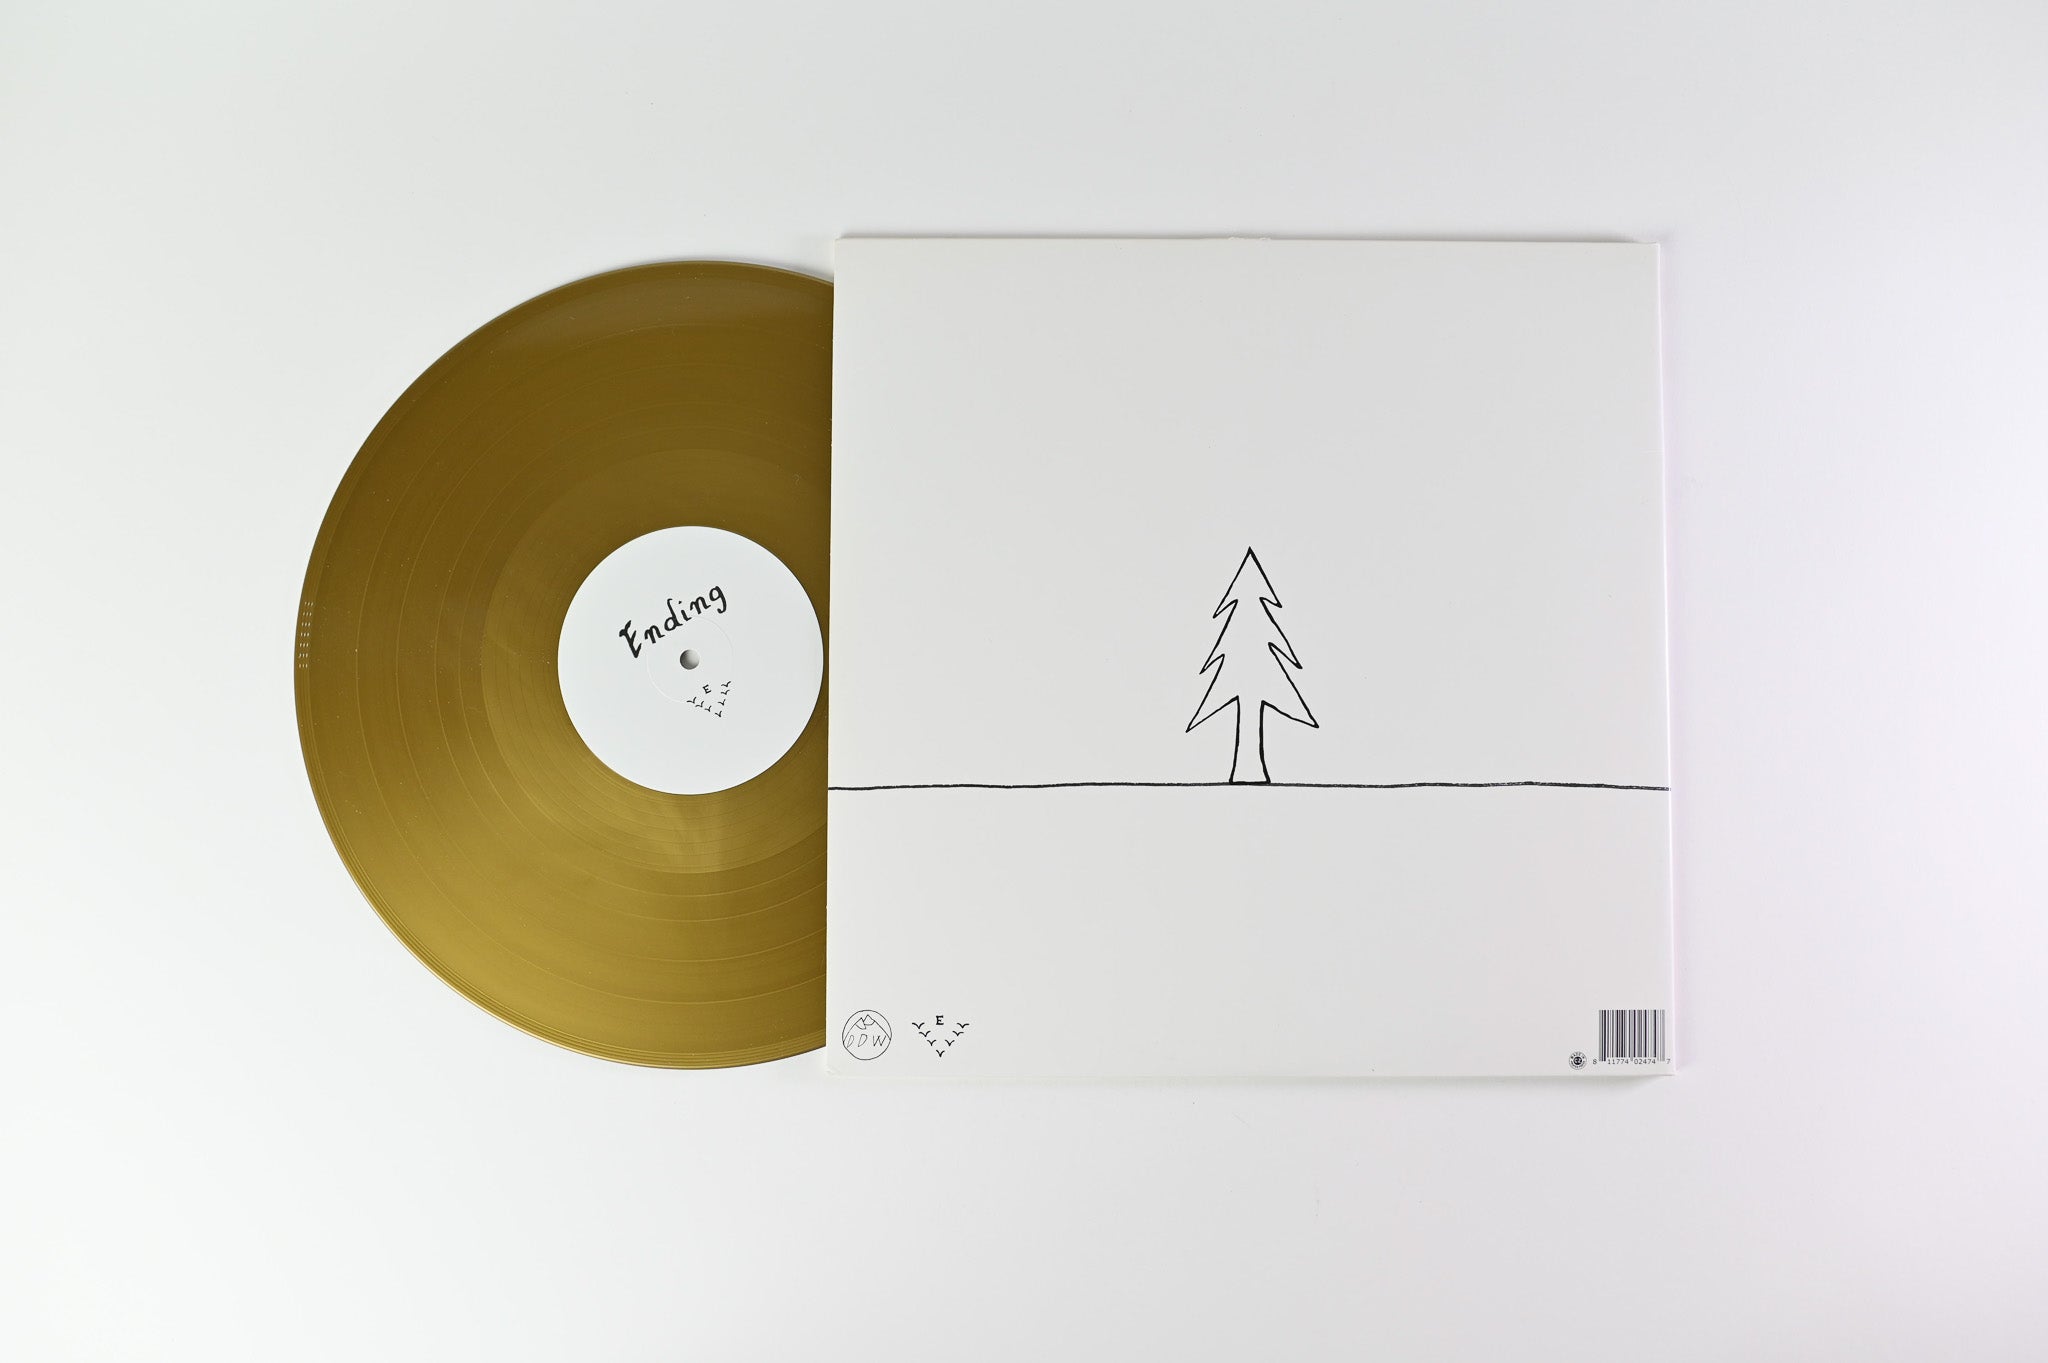 Told Slant - Going By on Double Double Whammy - Colored Vinyl